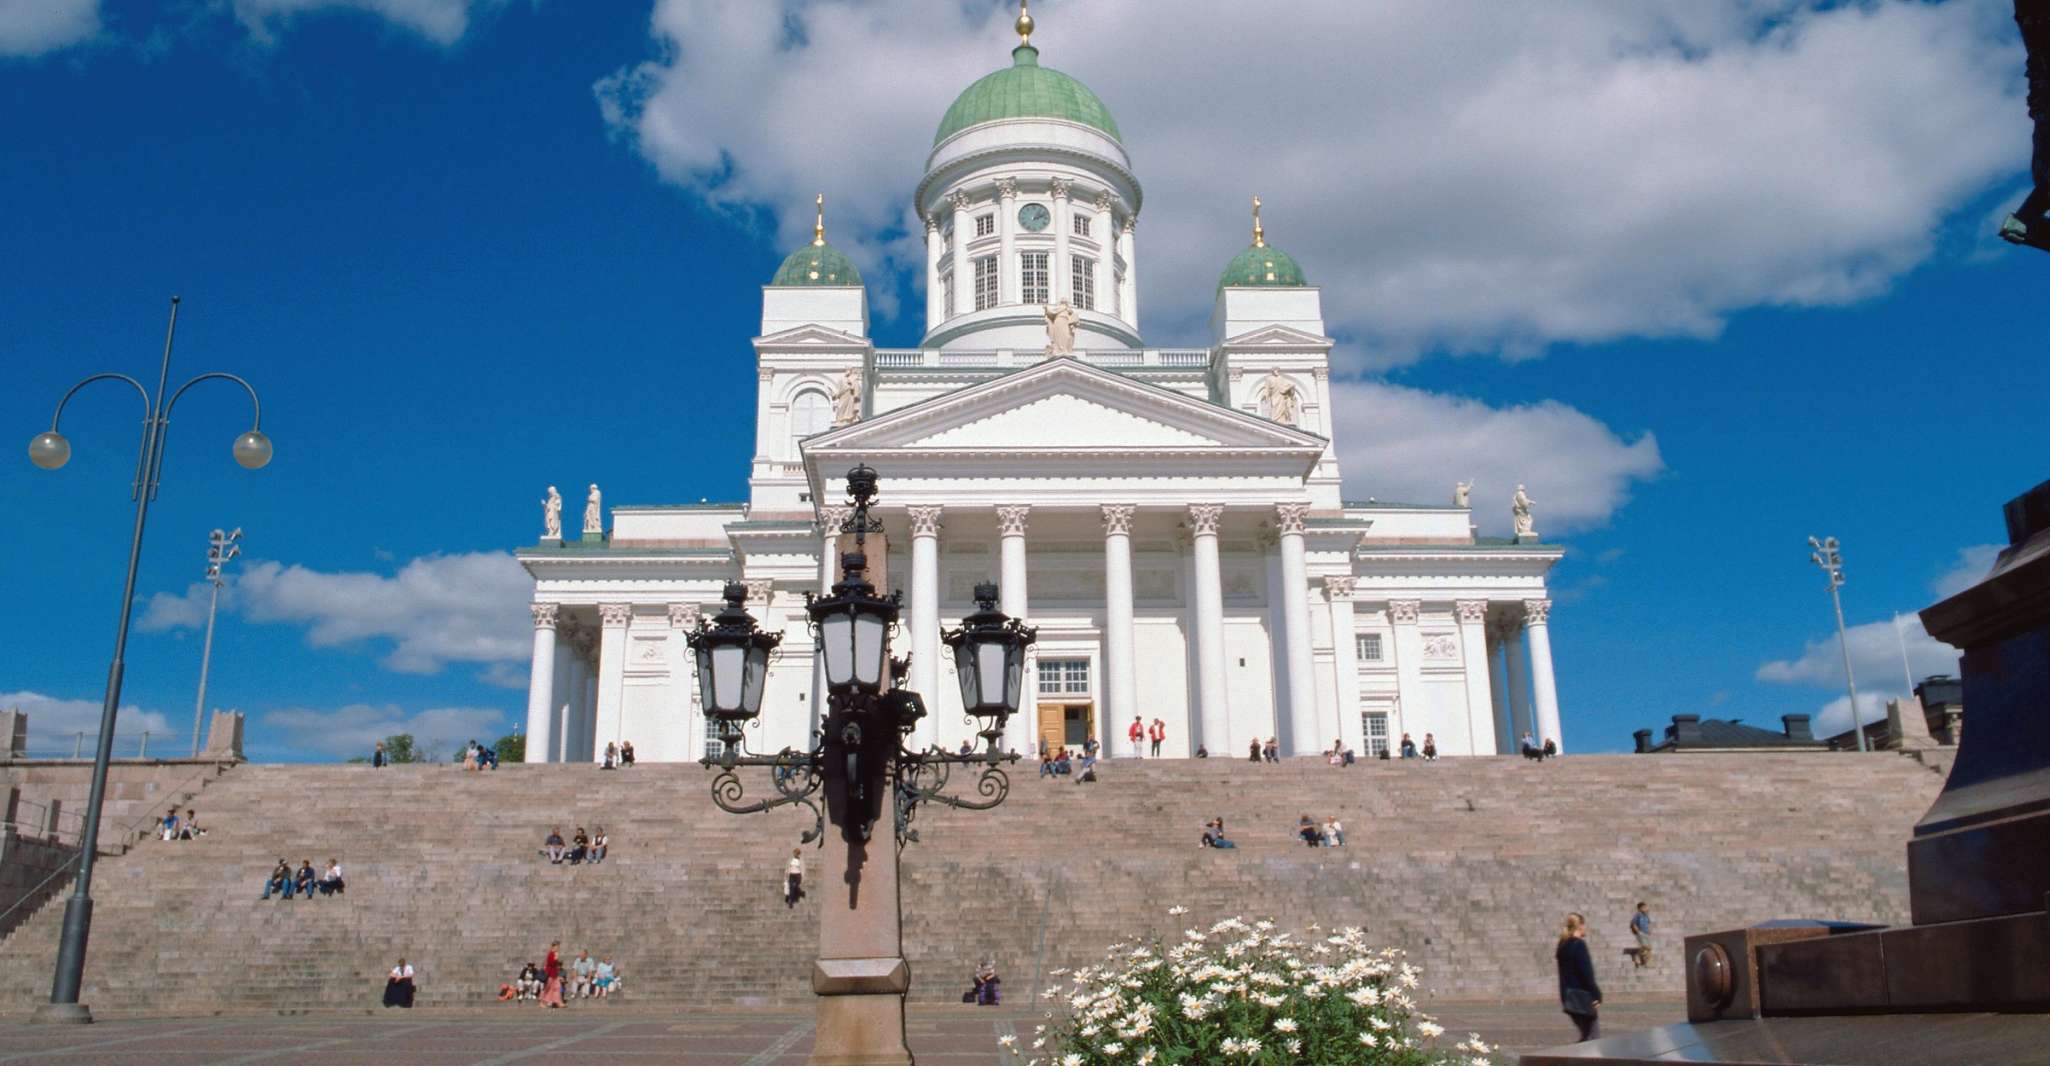 From Stockholm, Overnight Cruise to Helsinki with Breakfast - Housity